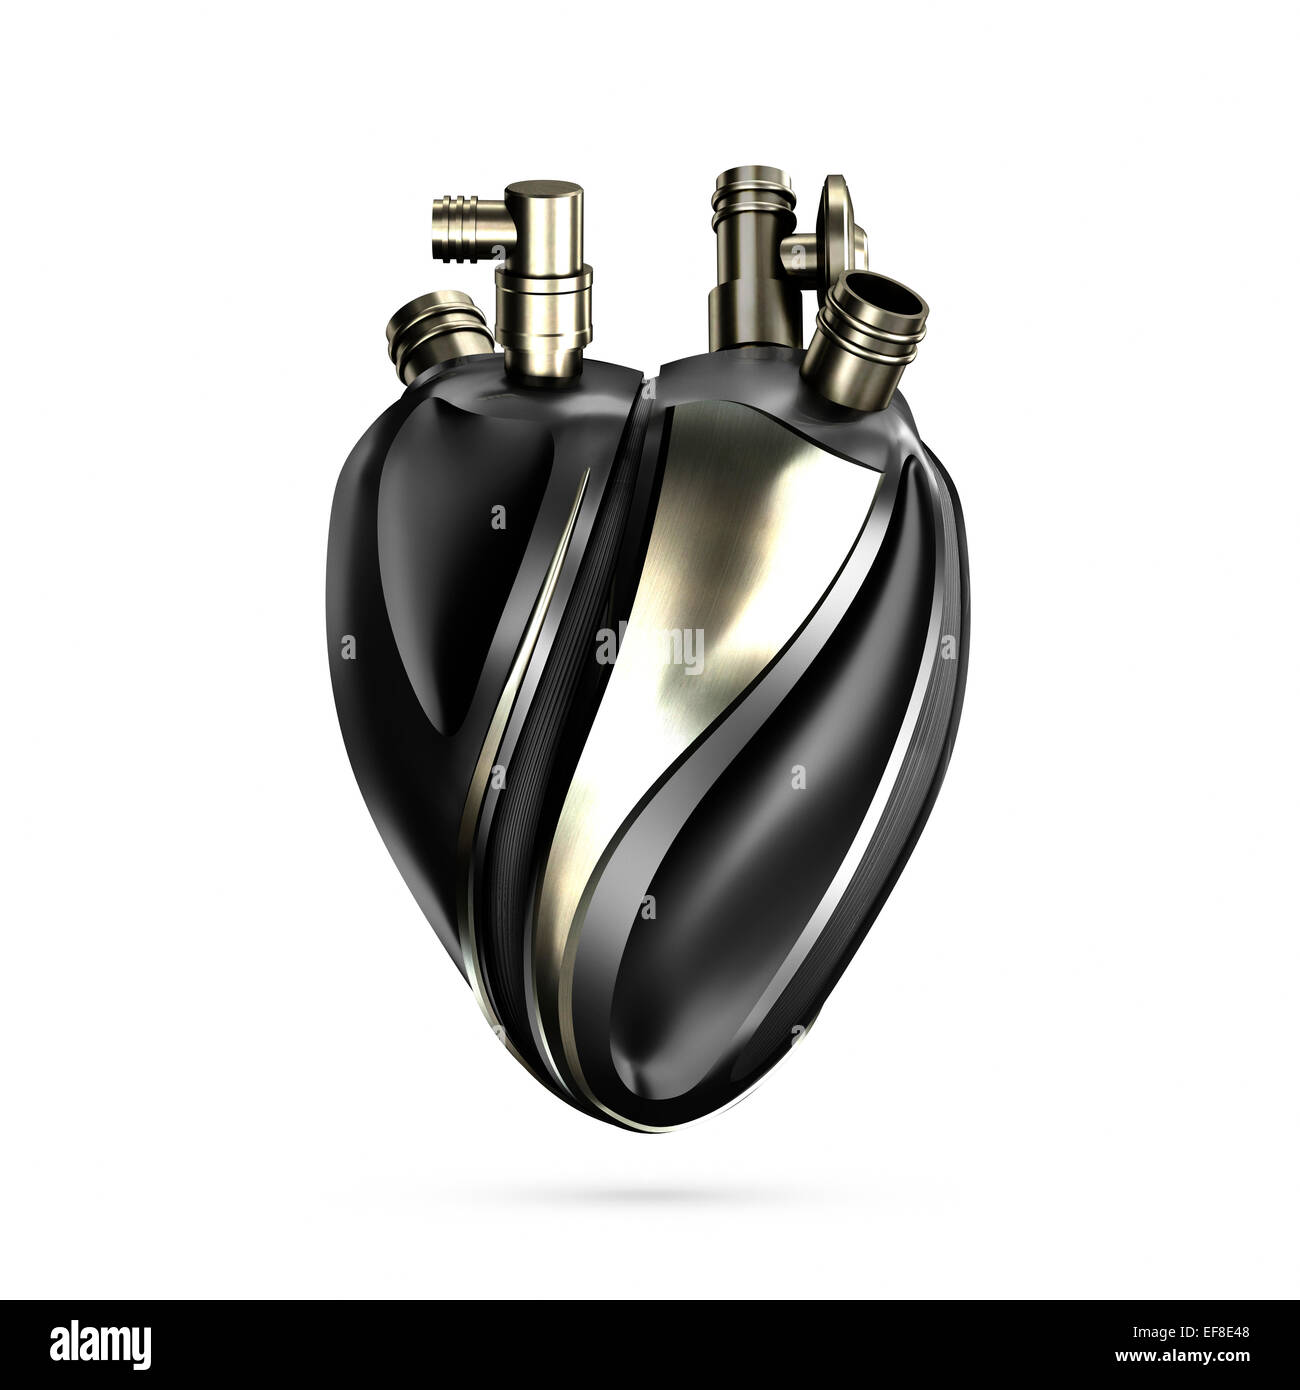 Metal heart as a machine part, conceptual 3D illustration isolated on white background Stock Photo